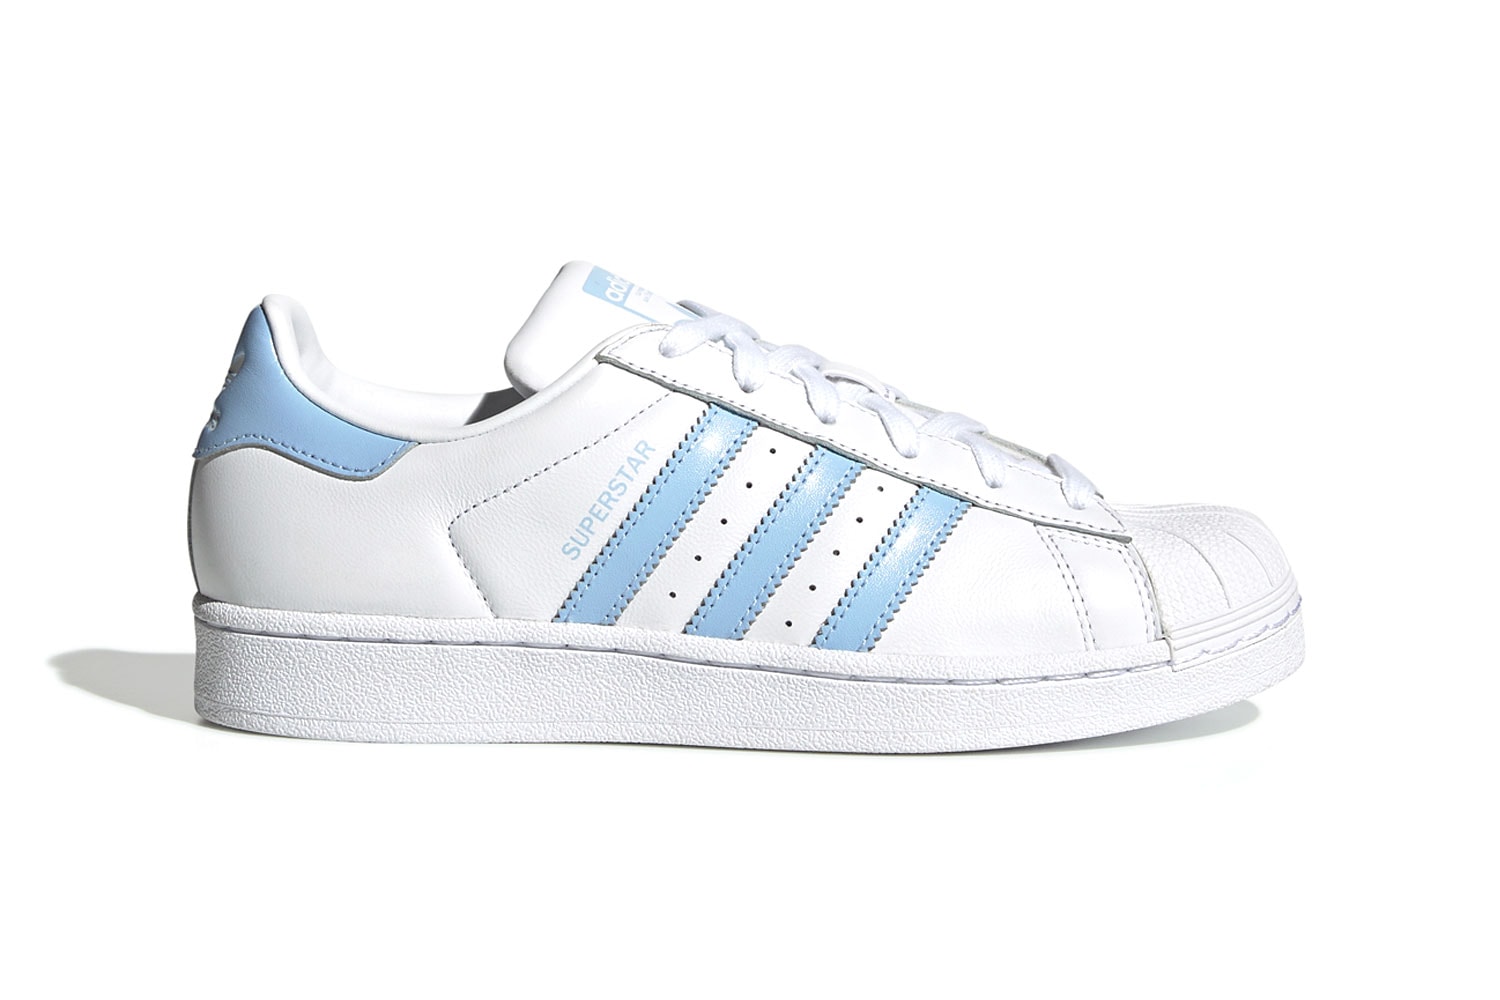 Buy Or Nah: We Got Our Hands On The Adidas Superstar BOOST